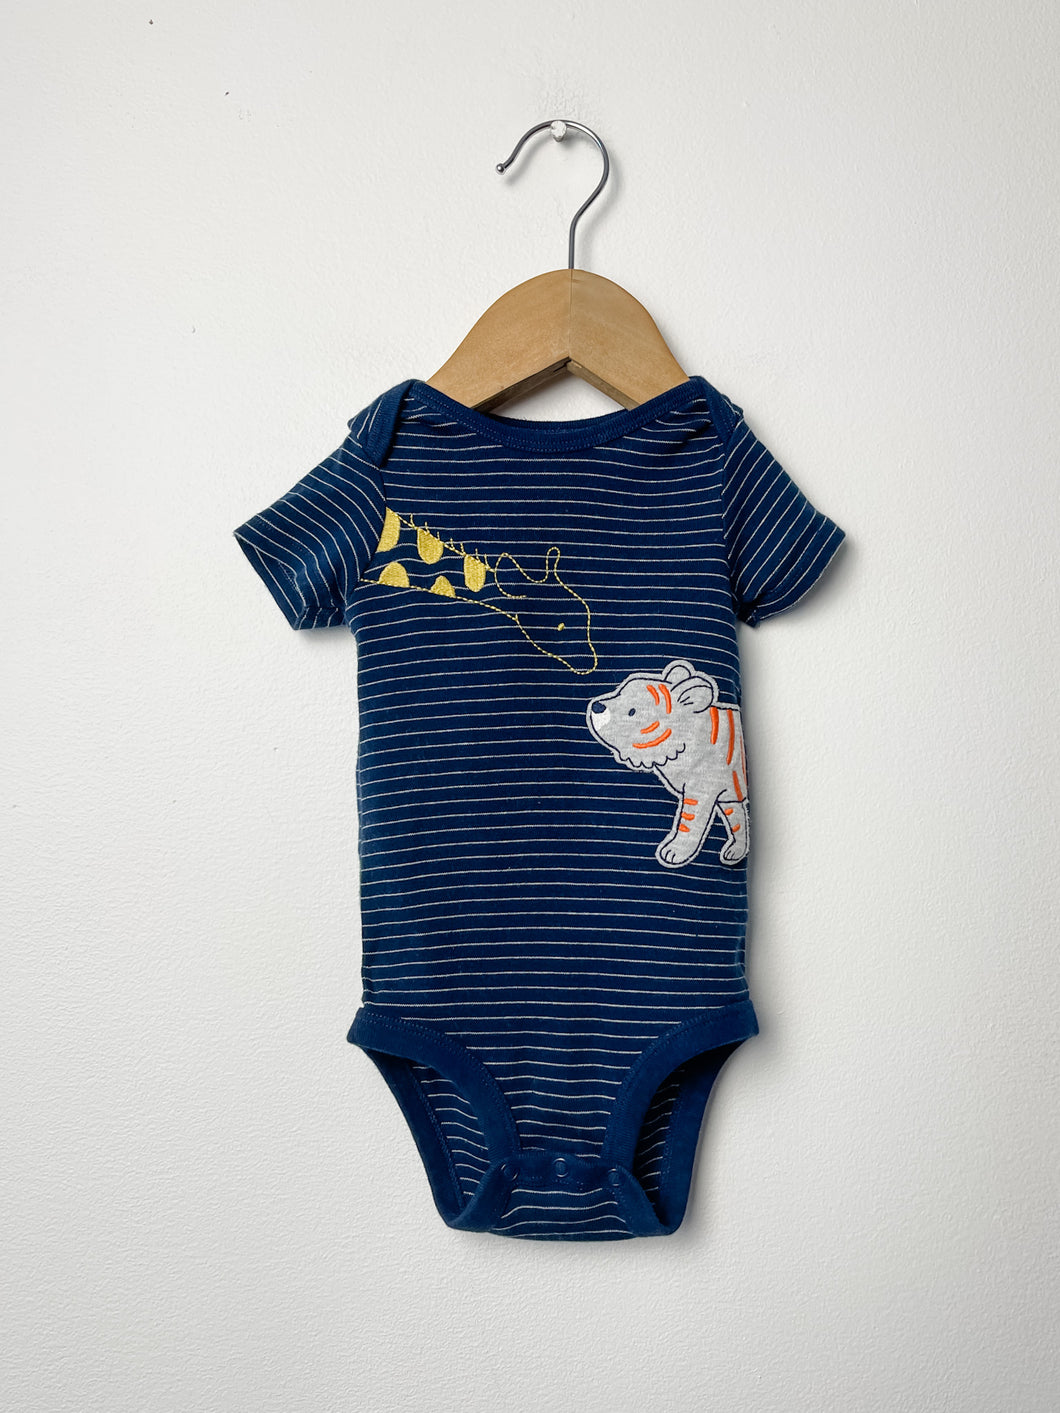 Striped Carters Bodysuit Size 3-6 Months